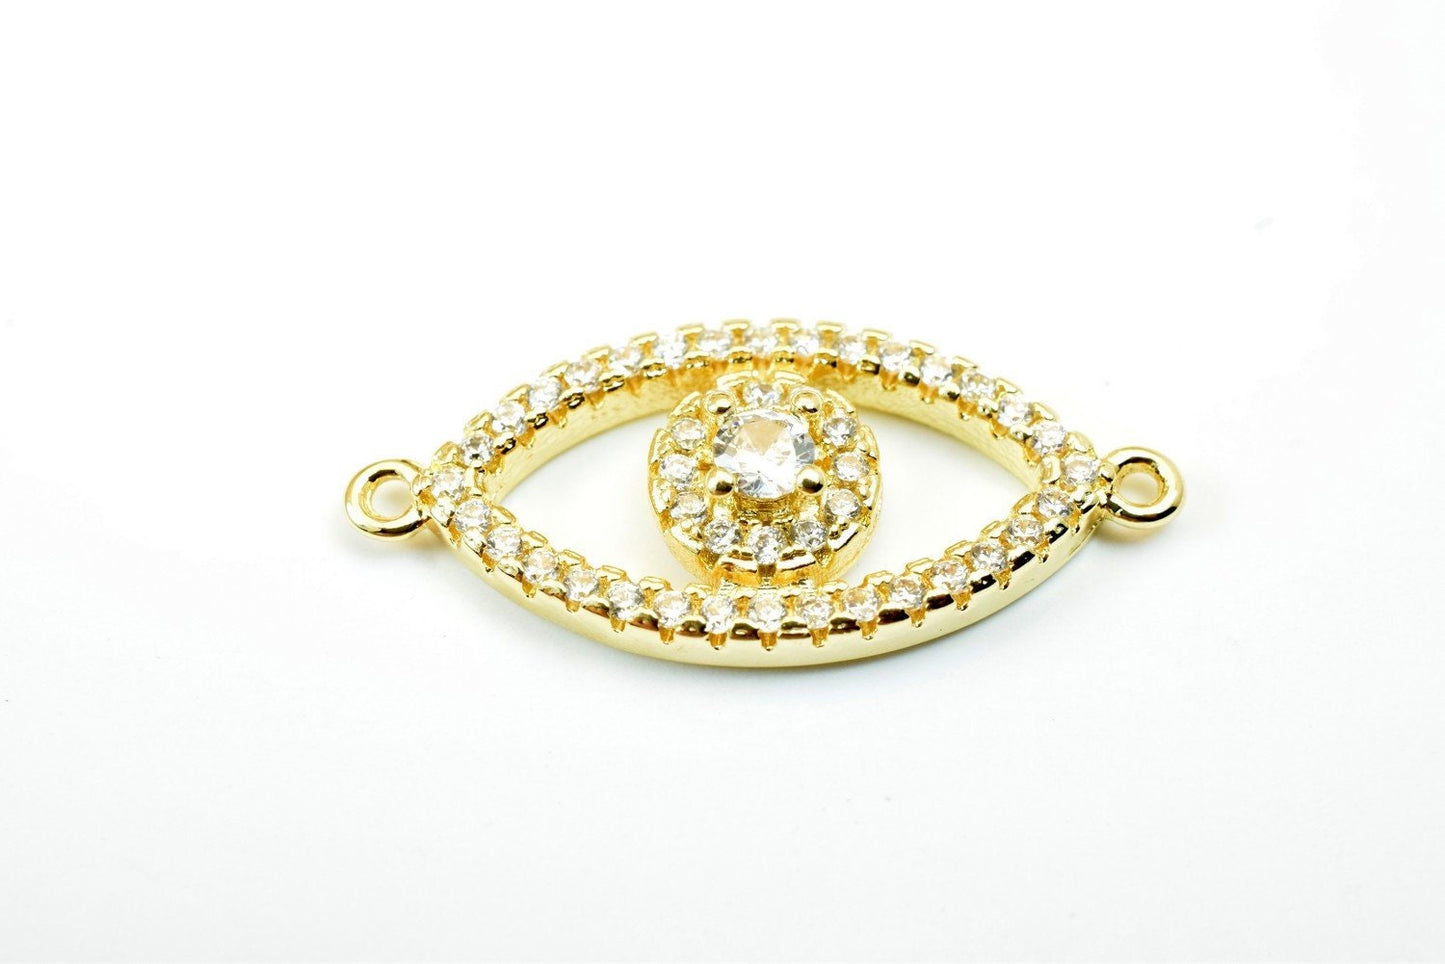 Evil Eye Rhinestone Connector 14K as Gold Filled tarnish resistant Size 25x10mm Micro Pave Beads Charm with Clear CZ Cubic Zirconia GFM34